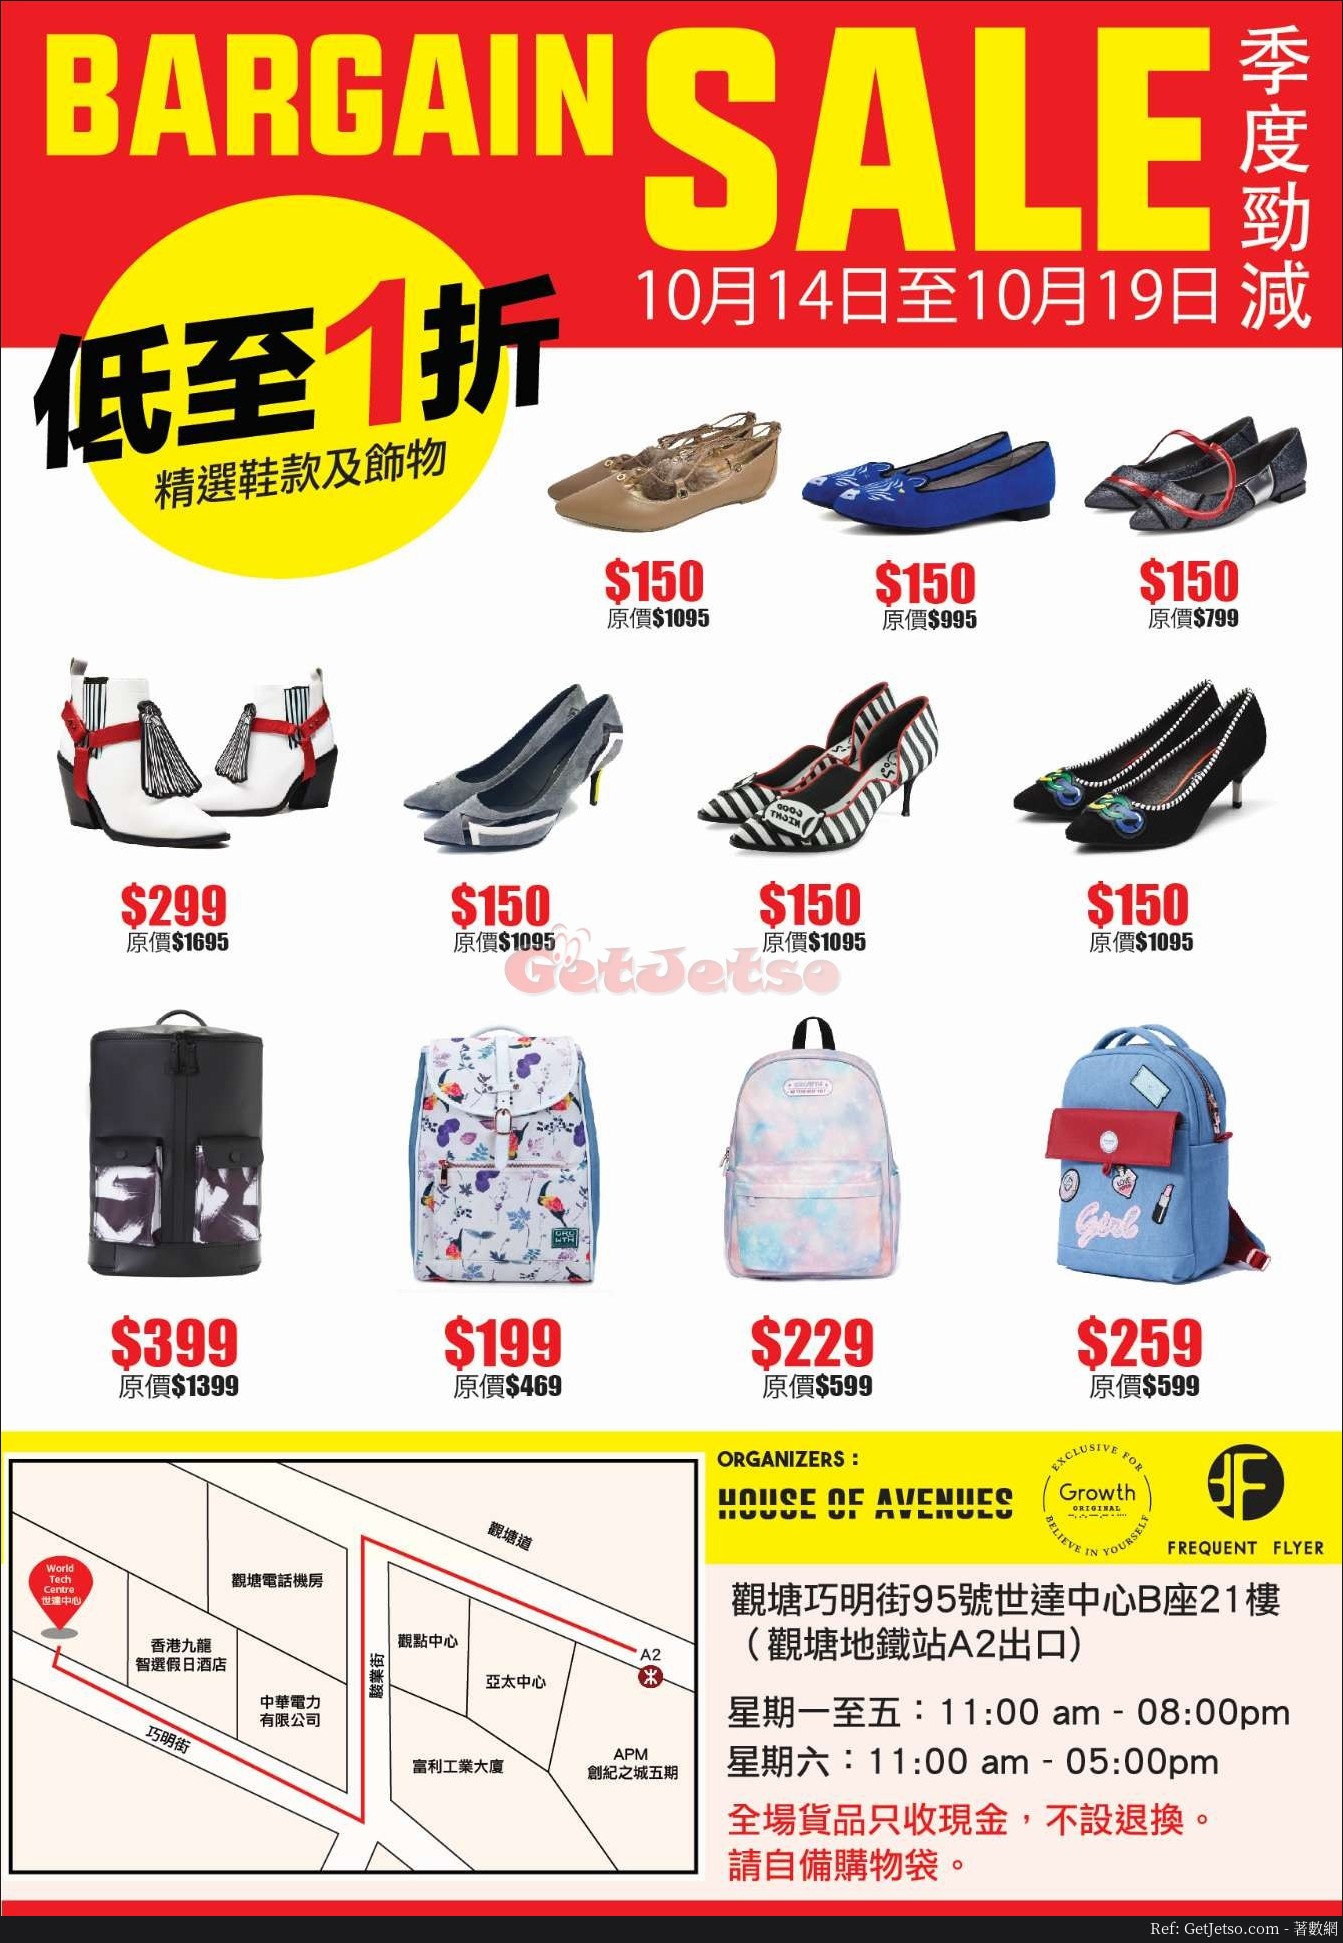 House of Avenues x Growth x Frequent Flyer 低至1折開倉優惠(19年10月14-19日)圖片1